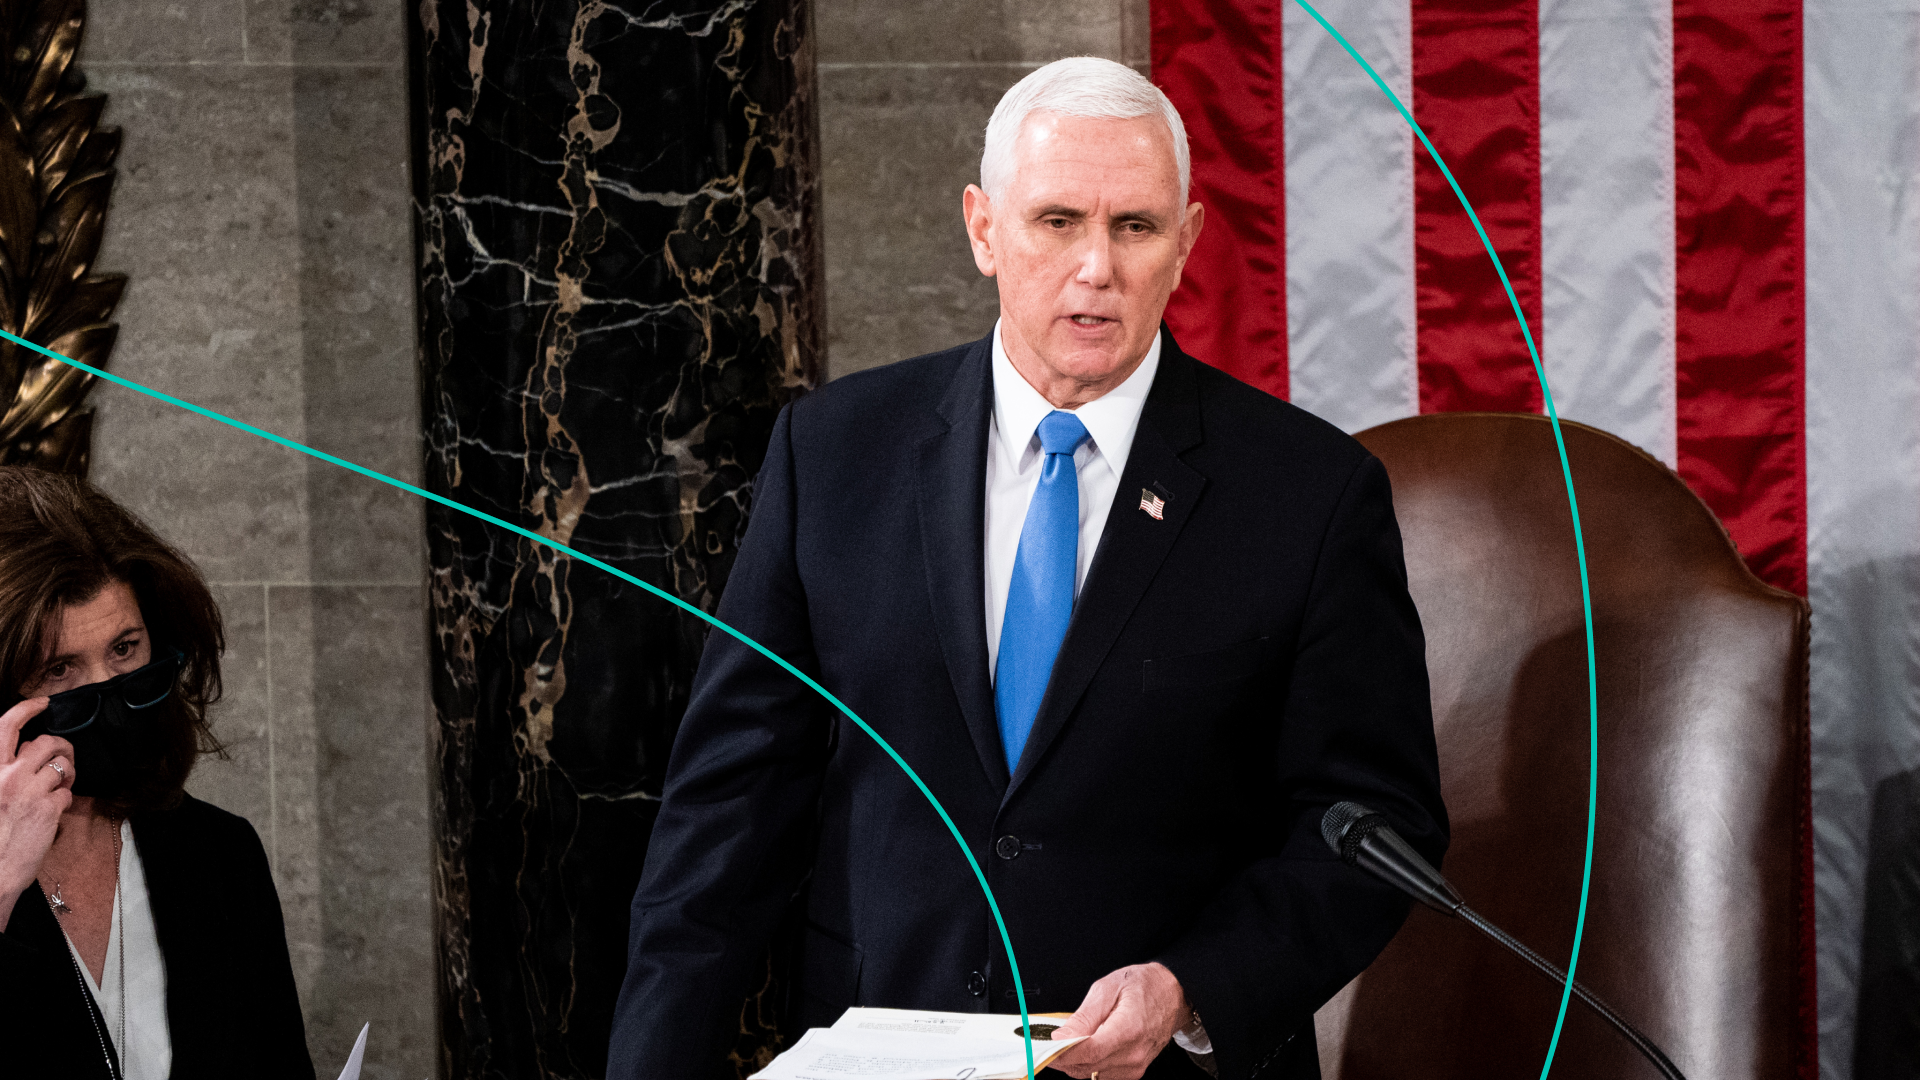 VP Mike Pence presides over a joint session of Congress to certify the 2020 Electoral College results